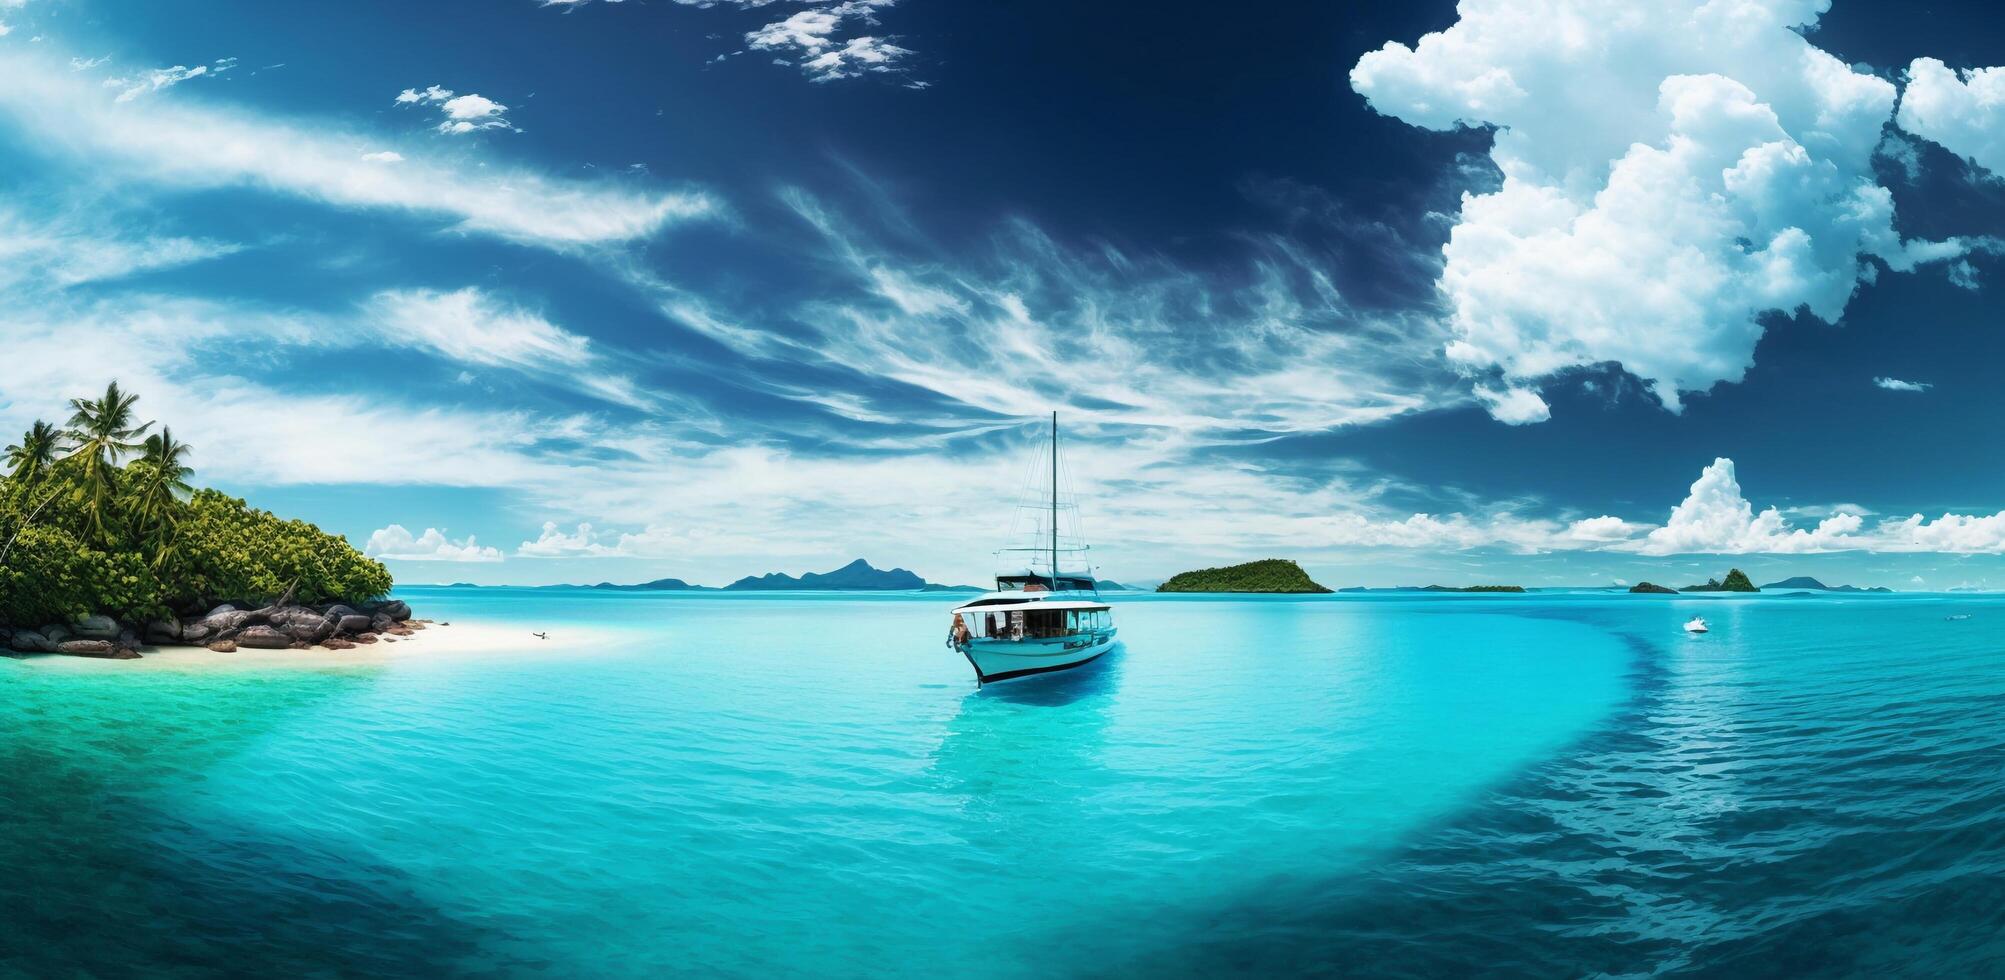 The landscape of tropical sea and island with a boat and . photo